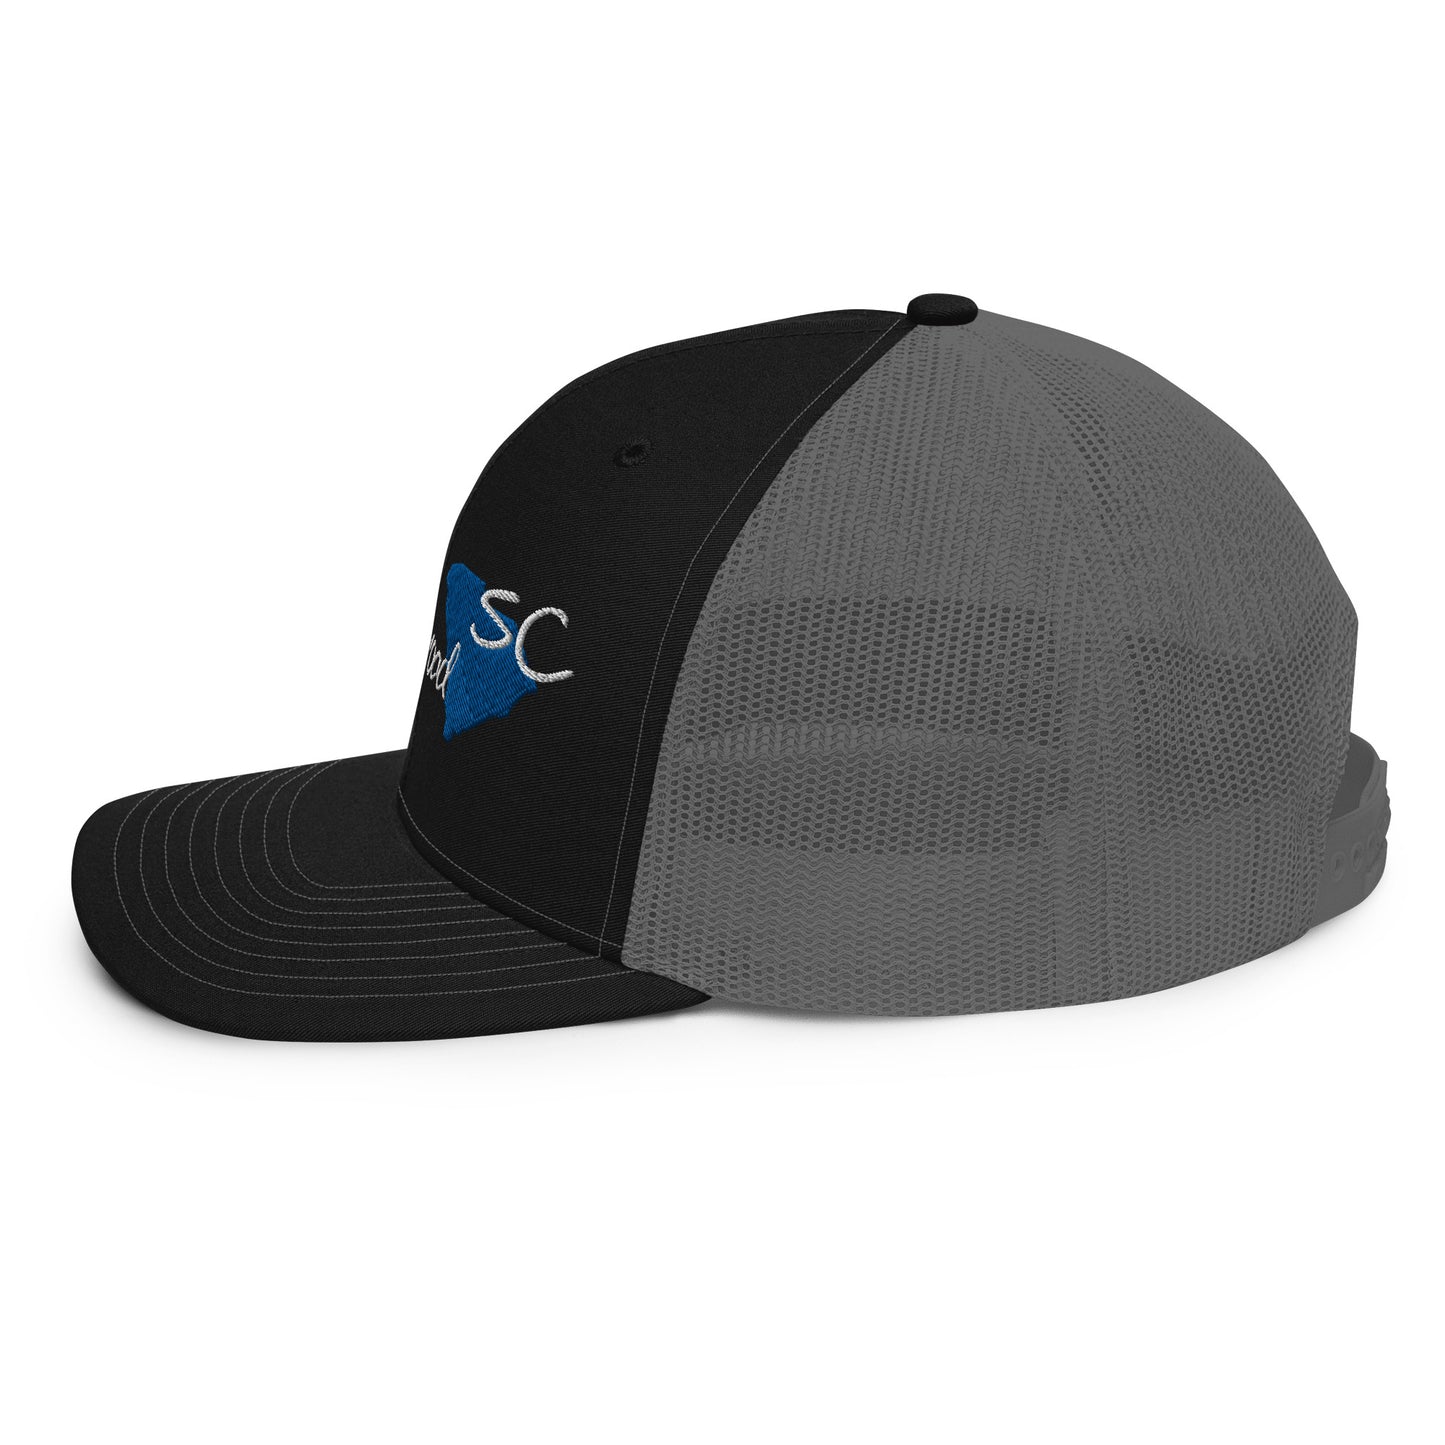 a black and grey hat with a blue and white logo